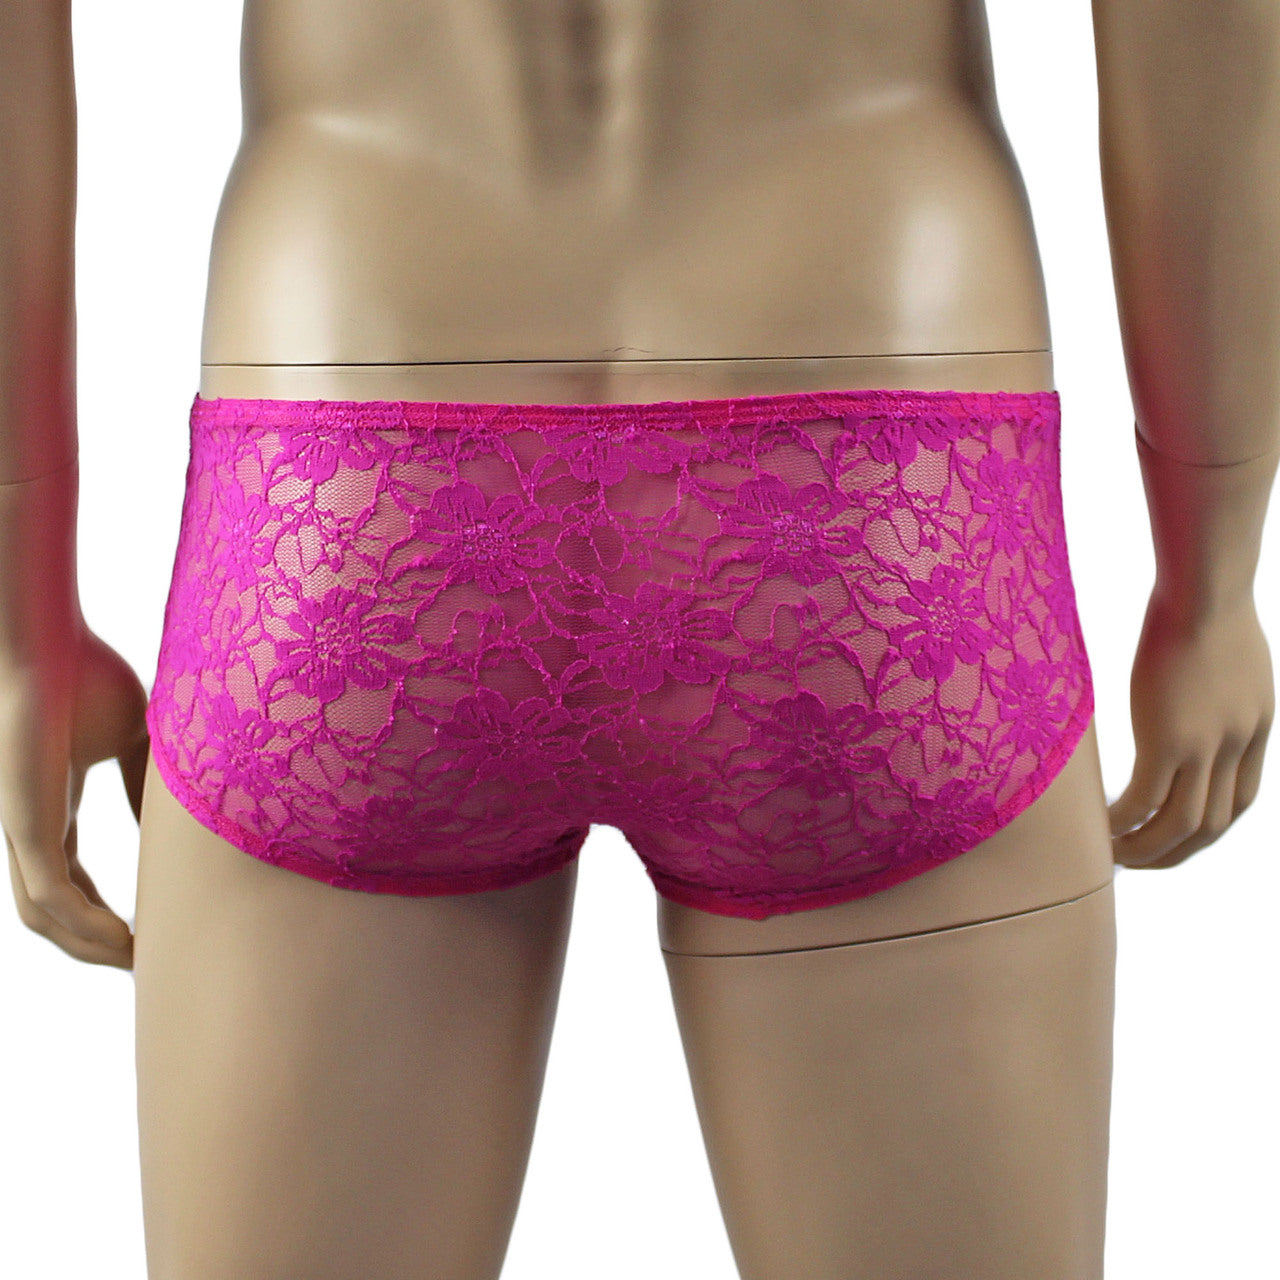 Mens Lace Crop Bra Top Camisole and Male Lingerie Panty Briefs (neon pink plus other colours)